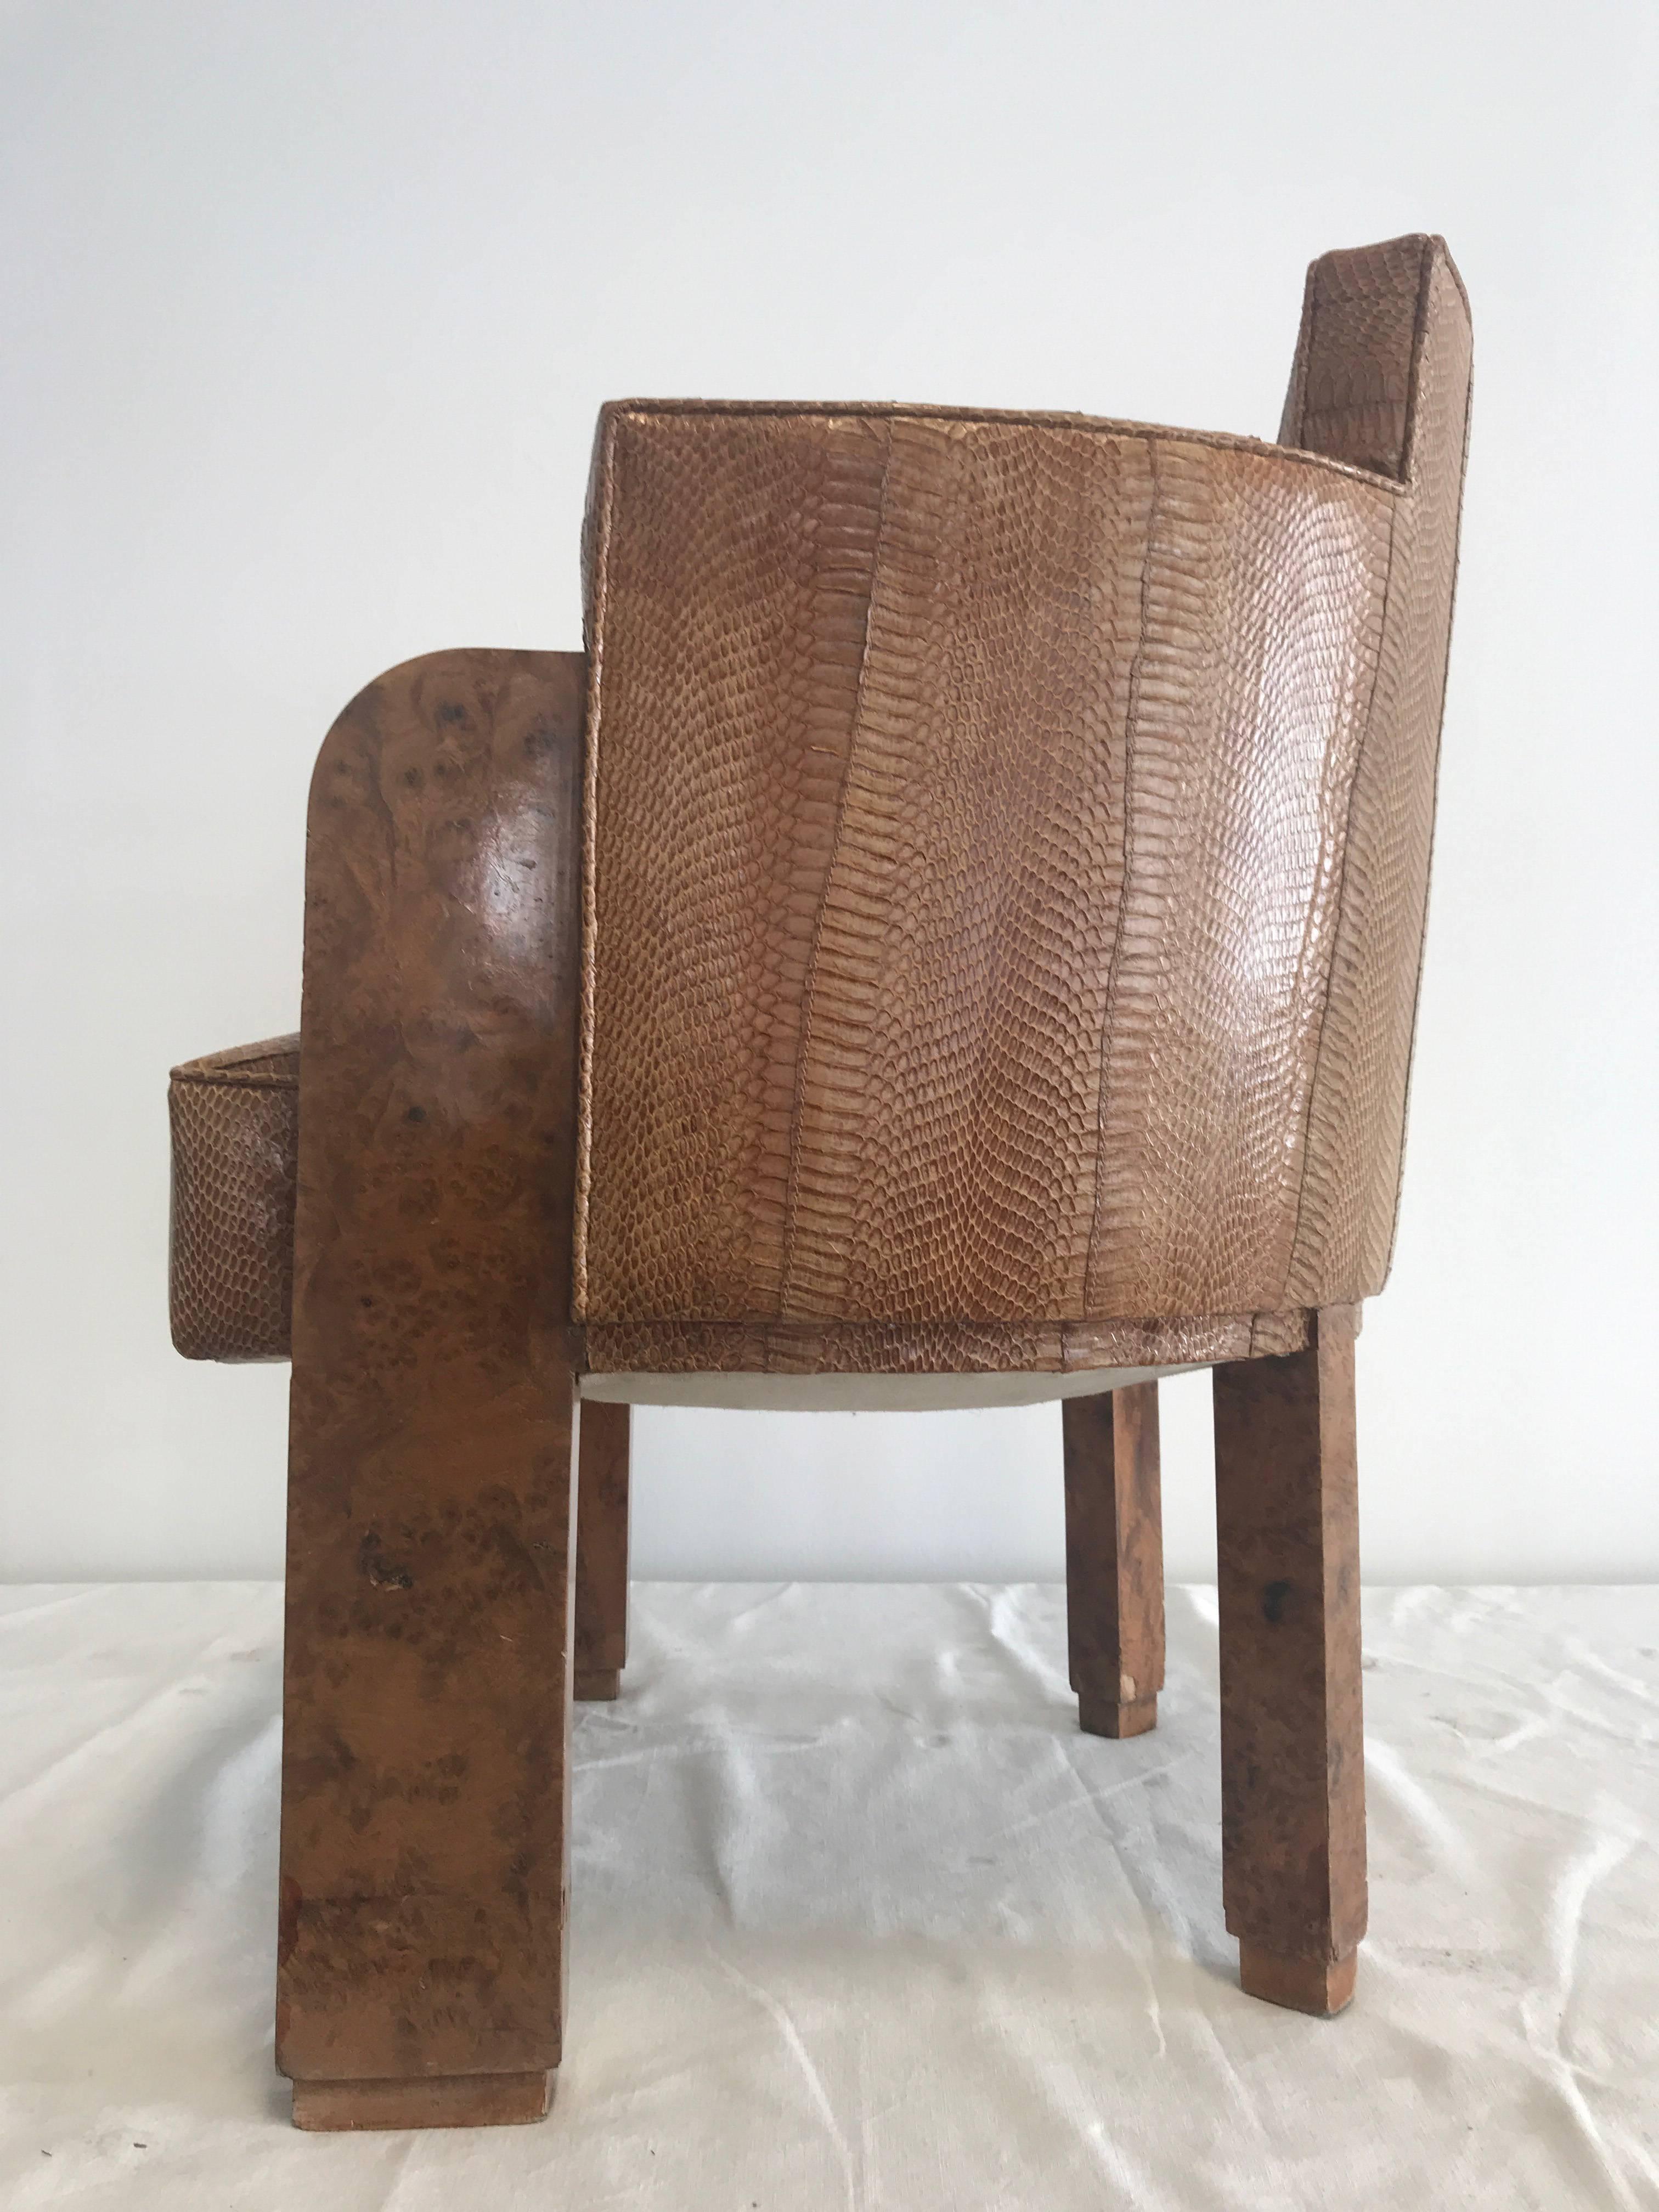 Michel Duffet armchair, the wood parts are covered with elm burl veneer upholstery with snake skin, the veneer is not perfect - small damages as shown on the images,
The chair is 73 cm high at the back, 56 cm wide, seat is 38 cm high and 48 cm